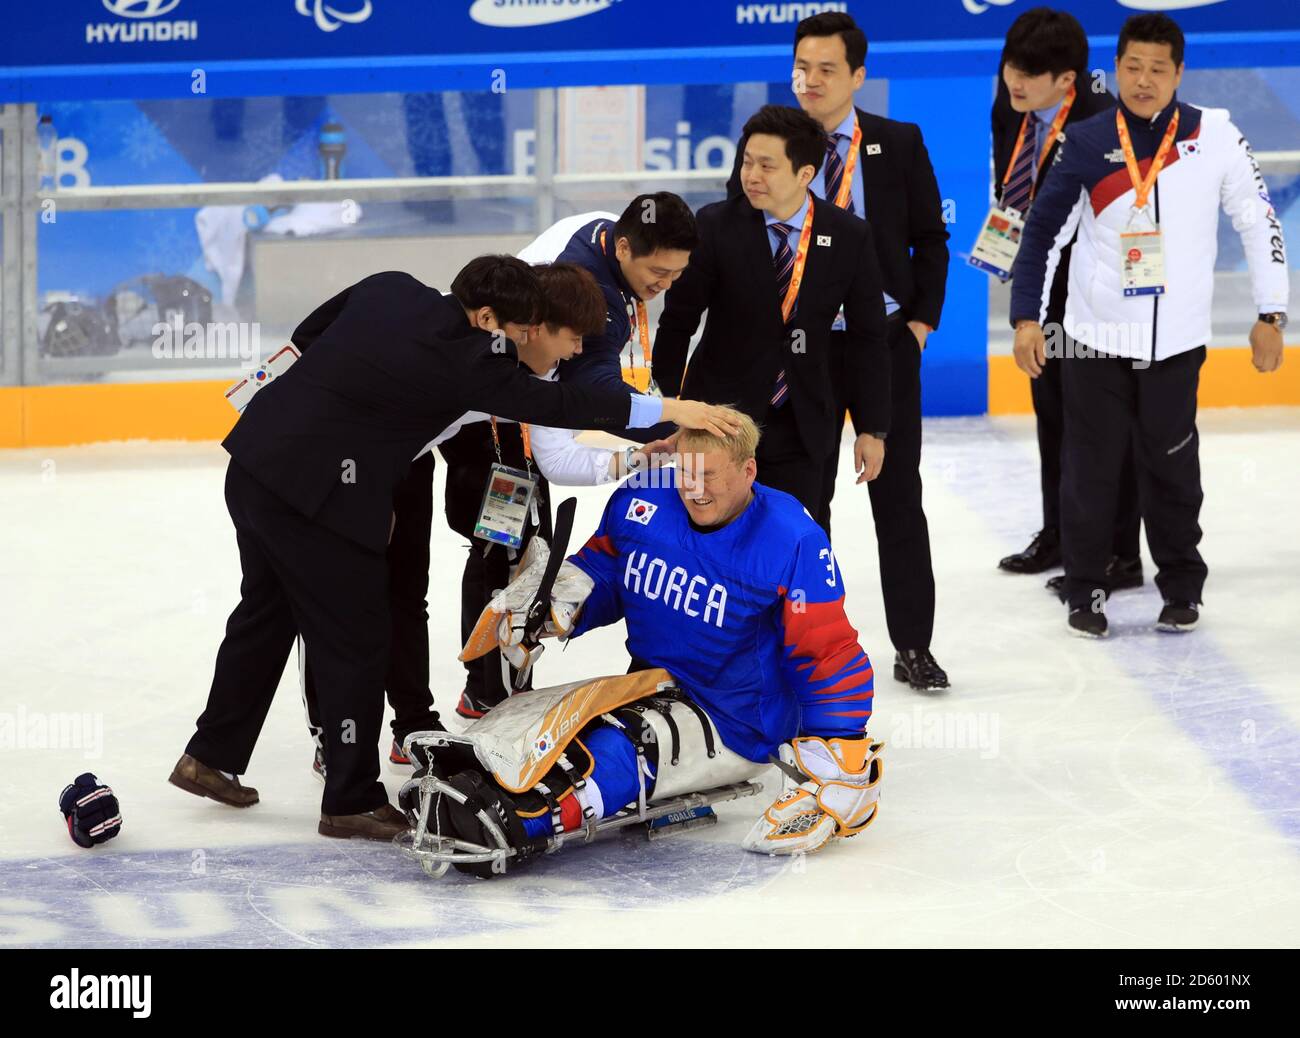 Korea goalkeeper Yu Man Gyrun celebrates their win with the coaches and Manager during day two of the PyeongChang 2018 Winter Paralympics in South Korea Stock Photo